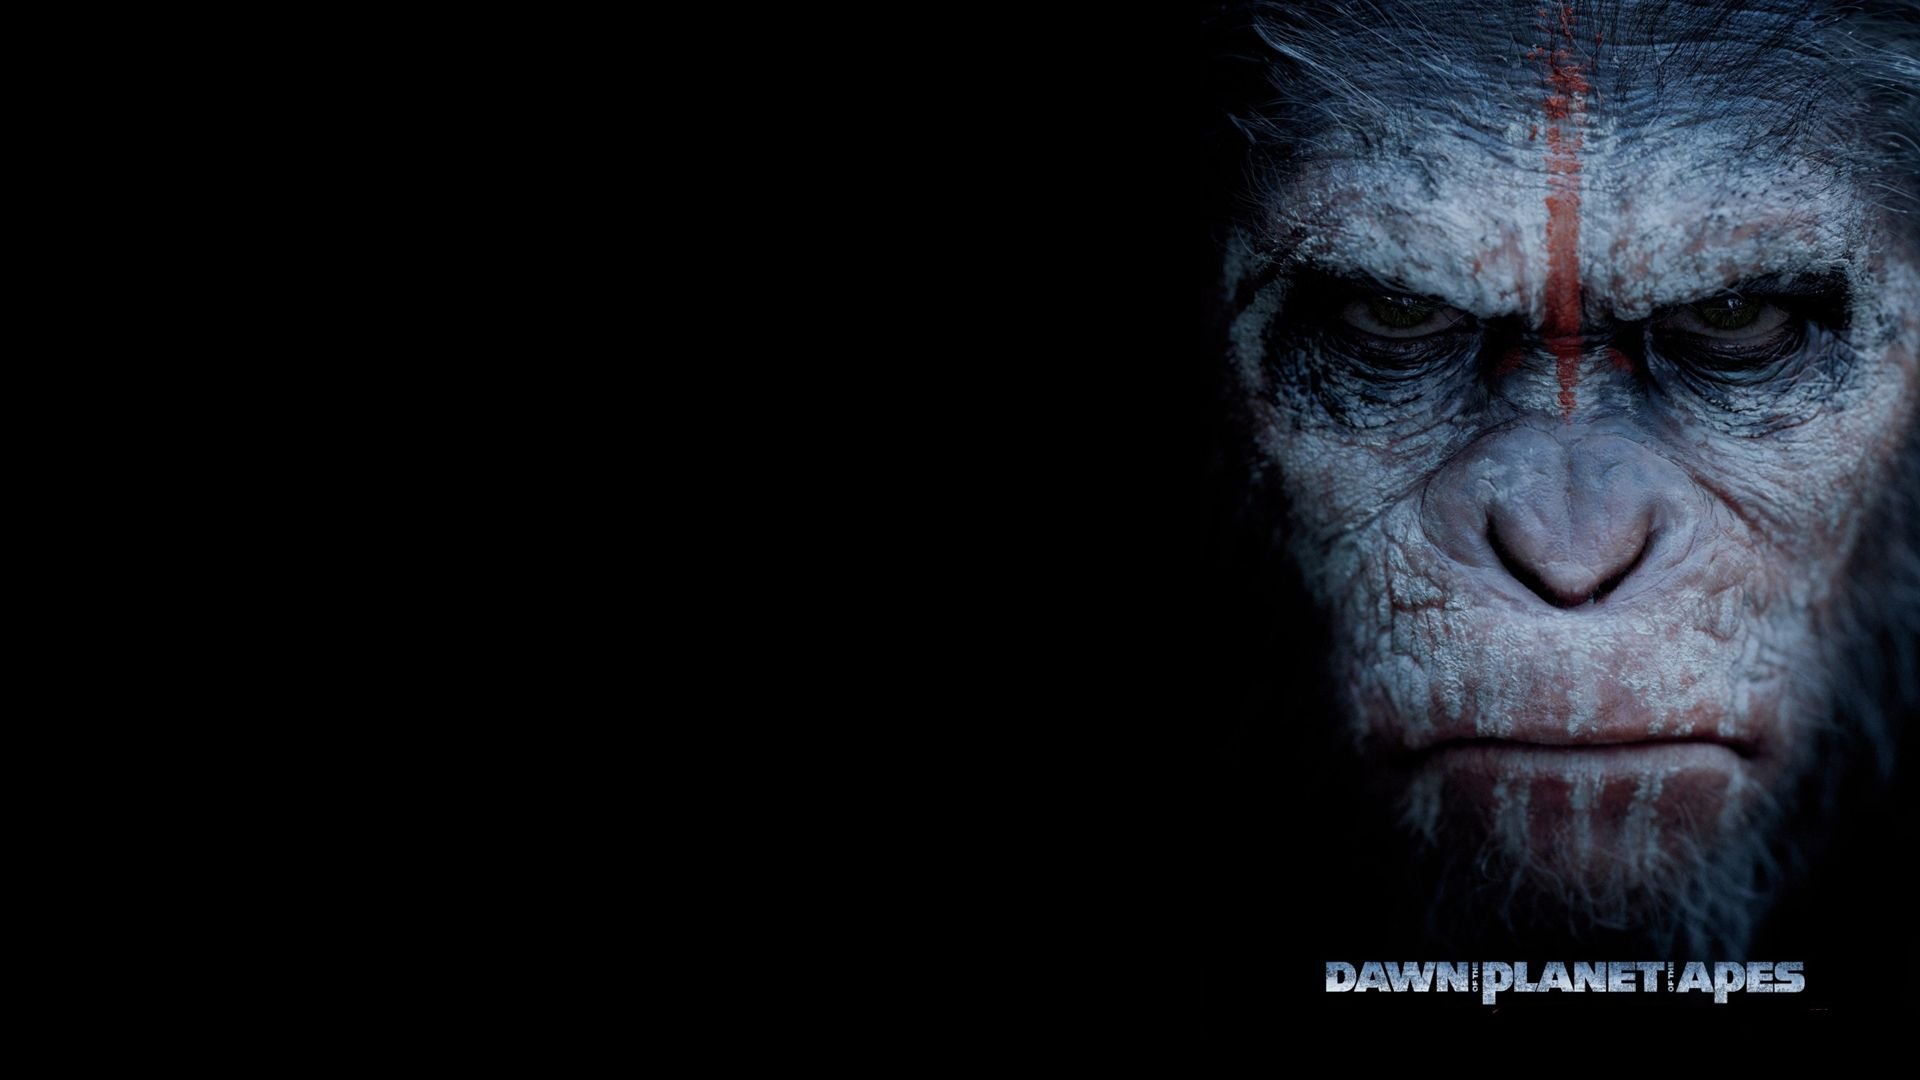 Planet of the Apes Background. Amazing